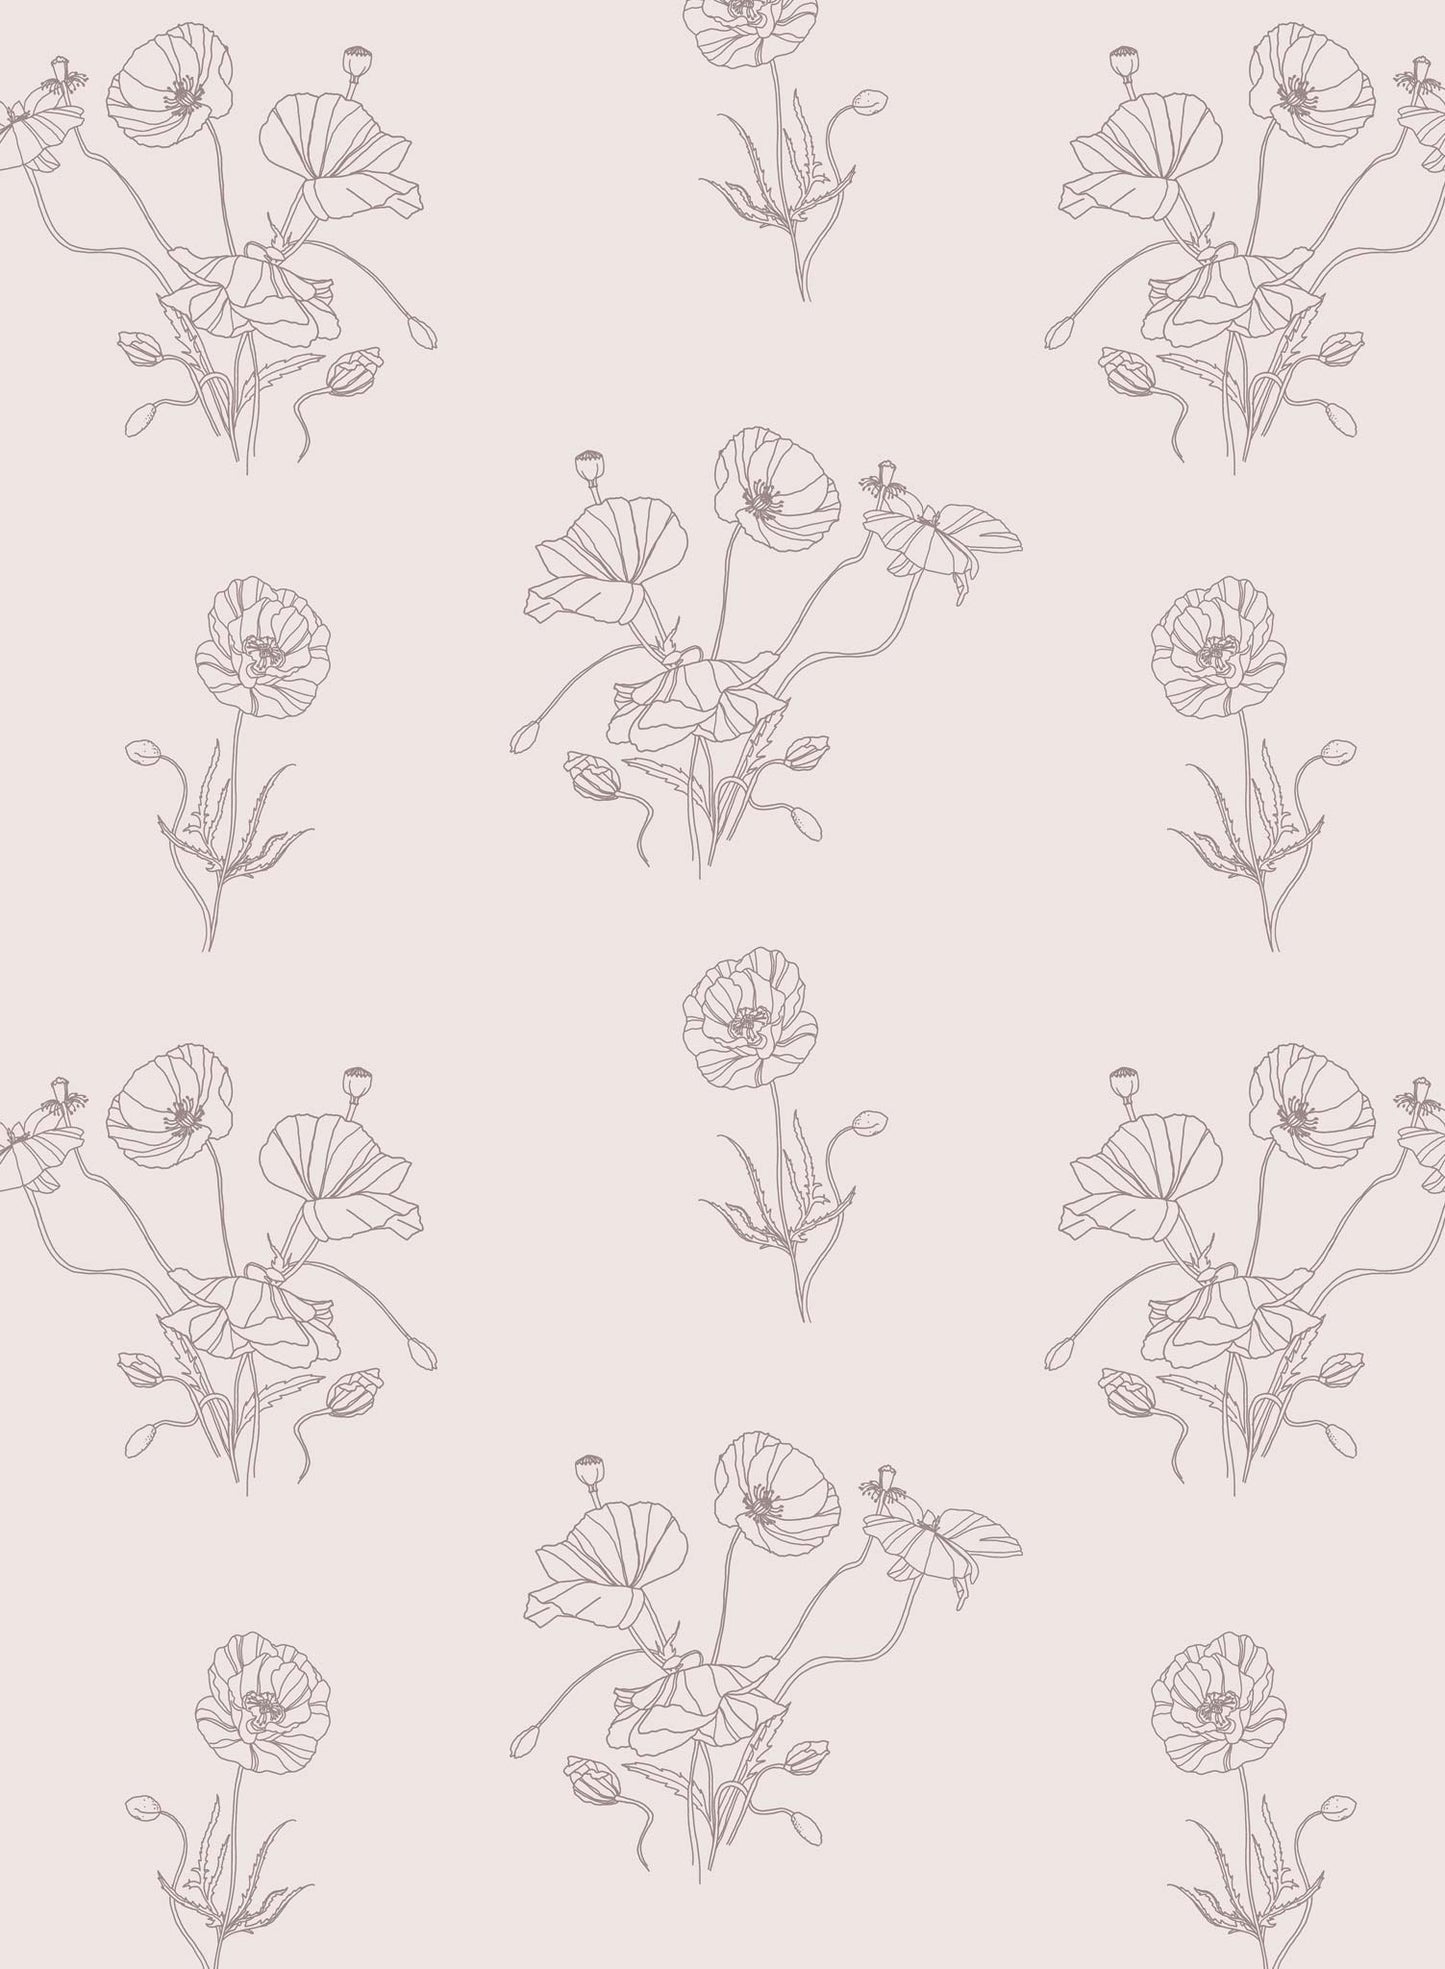 Springfield is a Minimalist wallpaper by Opposite Wall of poppies flowers.